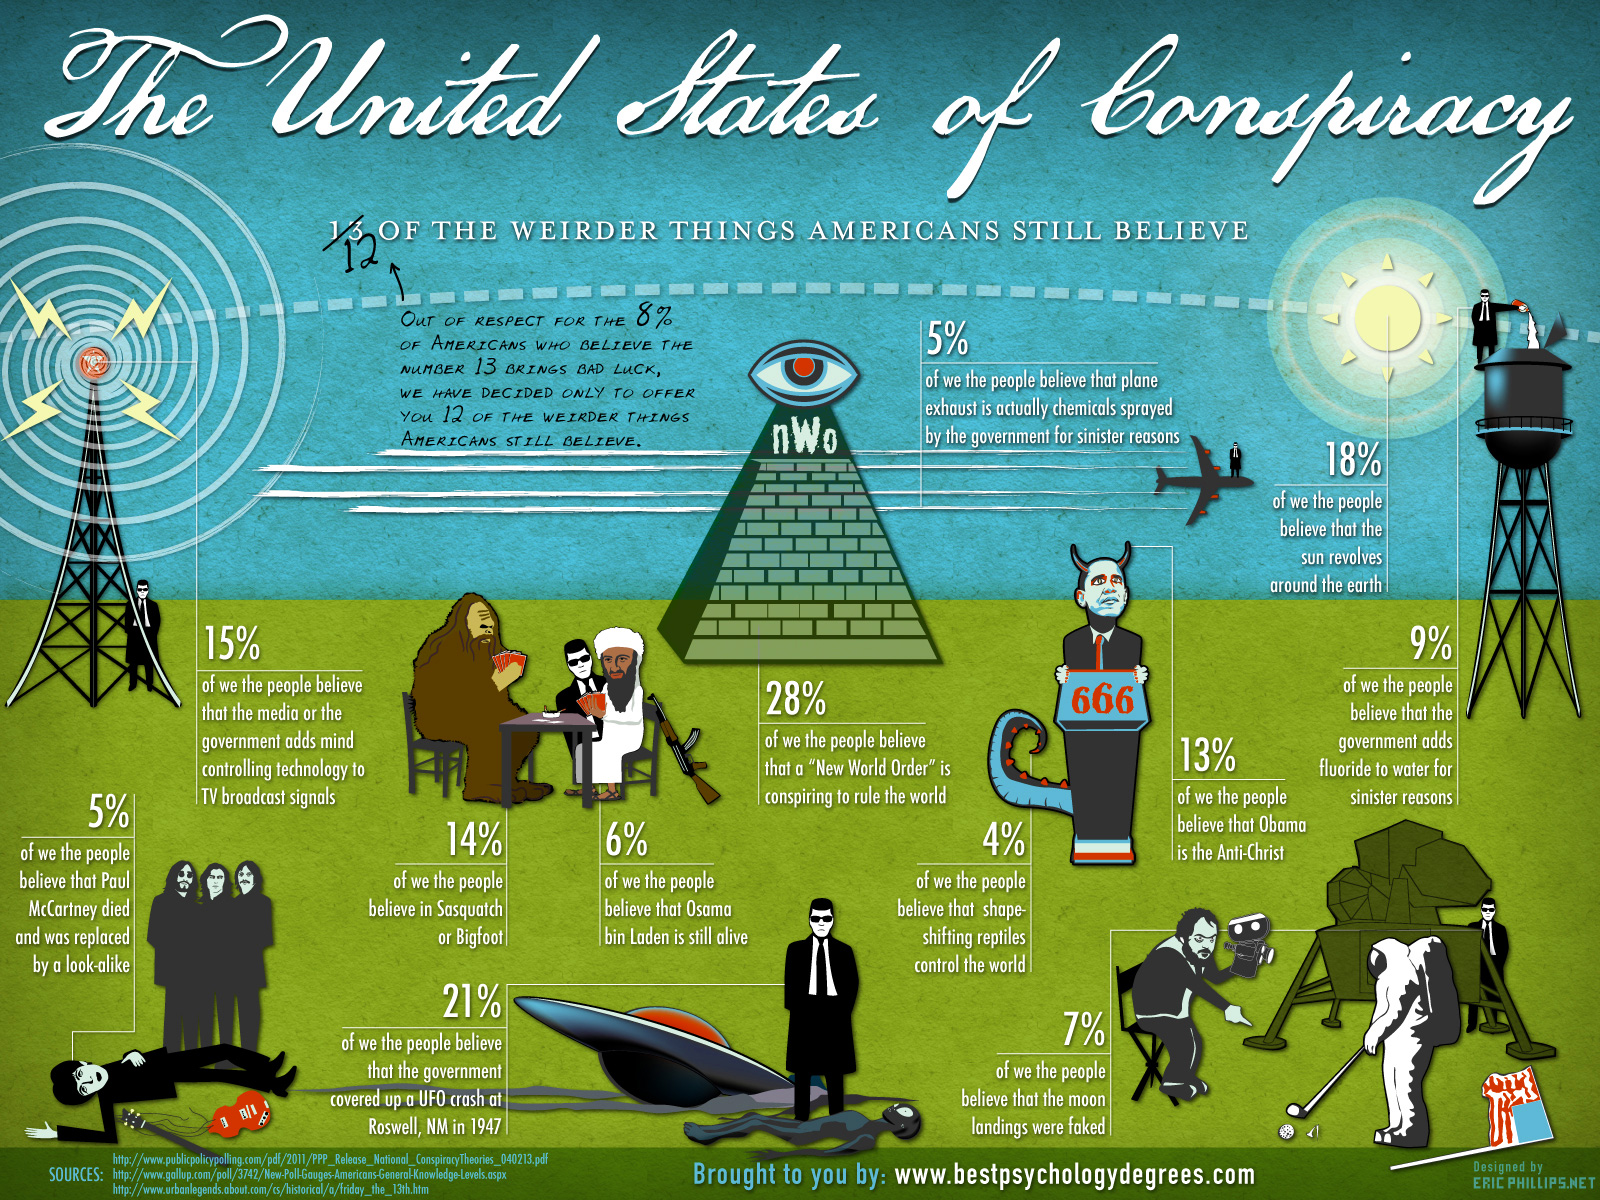 http://gnosticwarrior.com/wp-content/uploads/2013/08/meaning-of-conspiracy.jpg